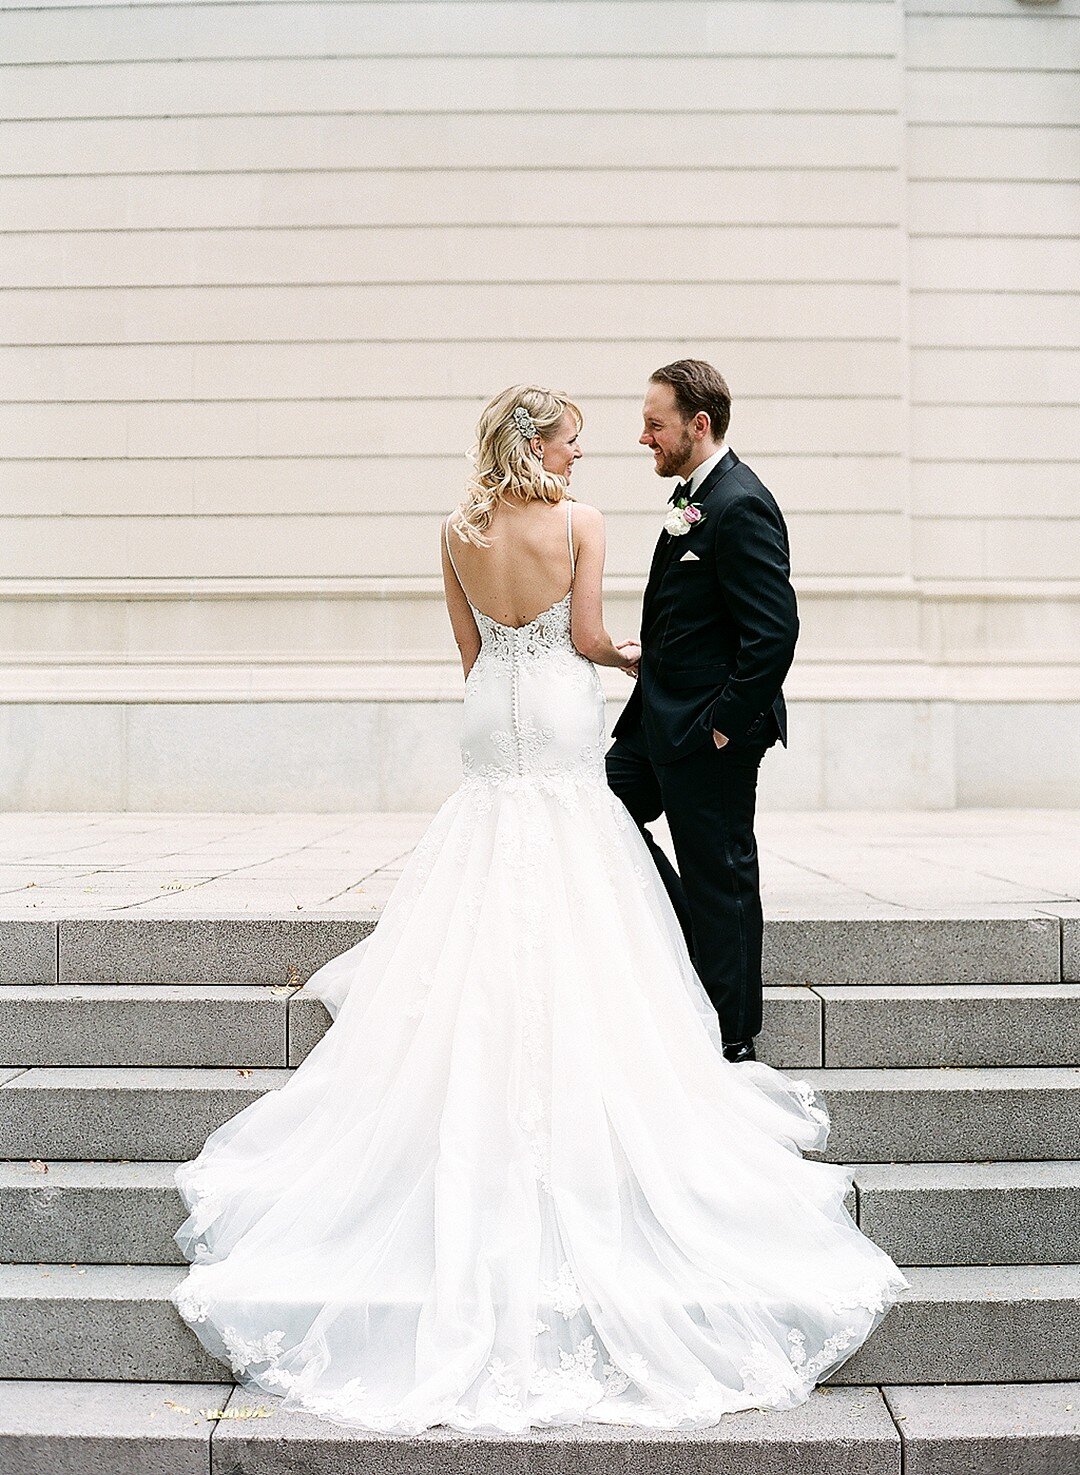 Classic Chicago Ballroom Wedding at The Blackstone captured by bonphotage | CHI thee WED